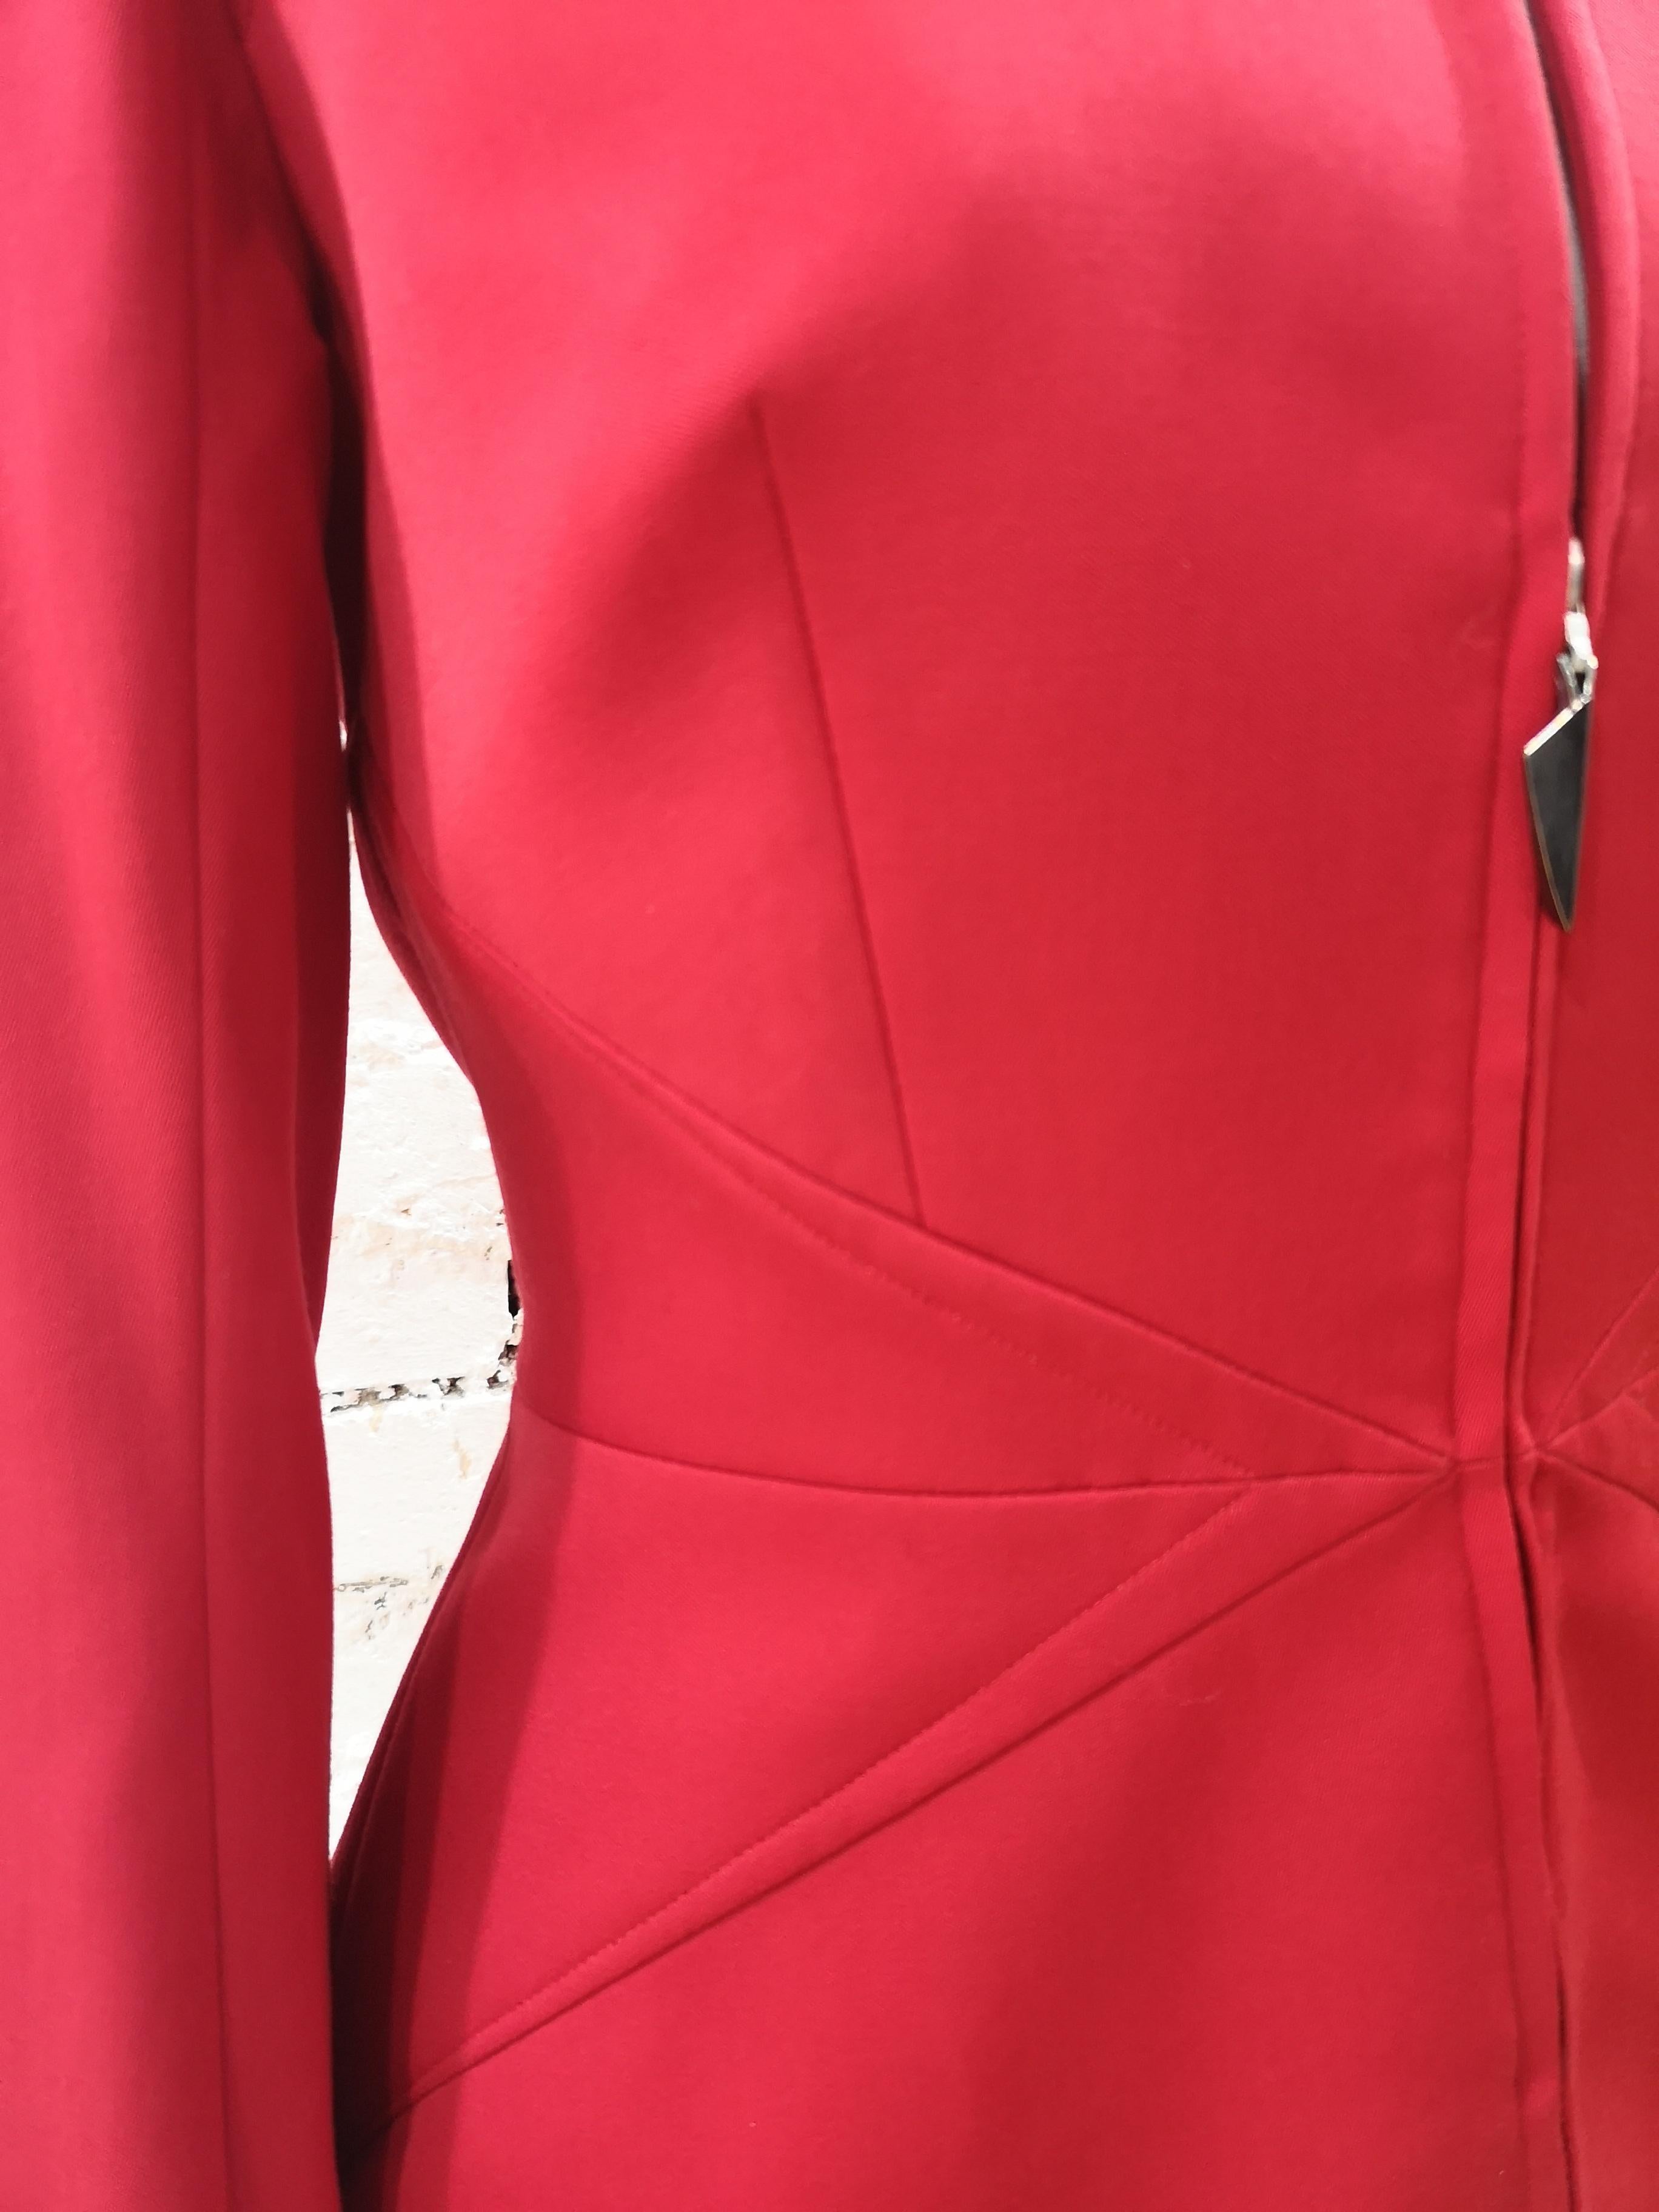 Thierry Mugler Red Jacket In Excellent Condition For Sale In Capri, IT